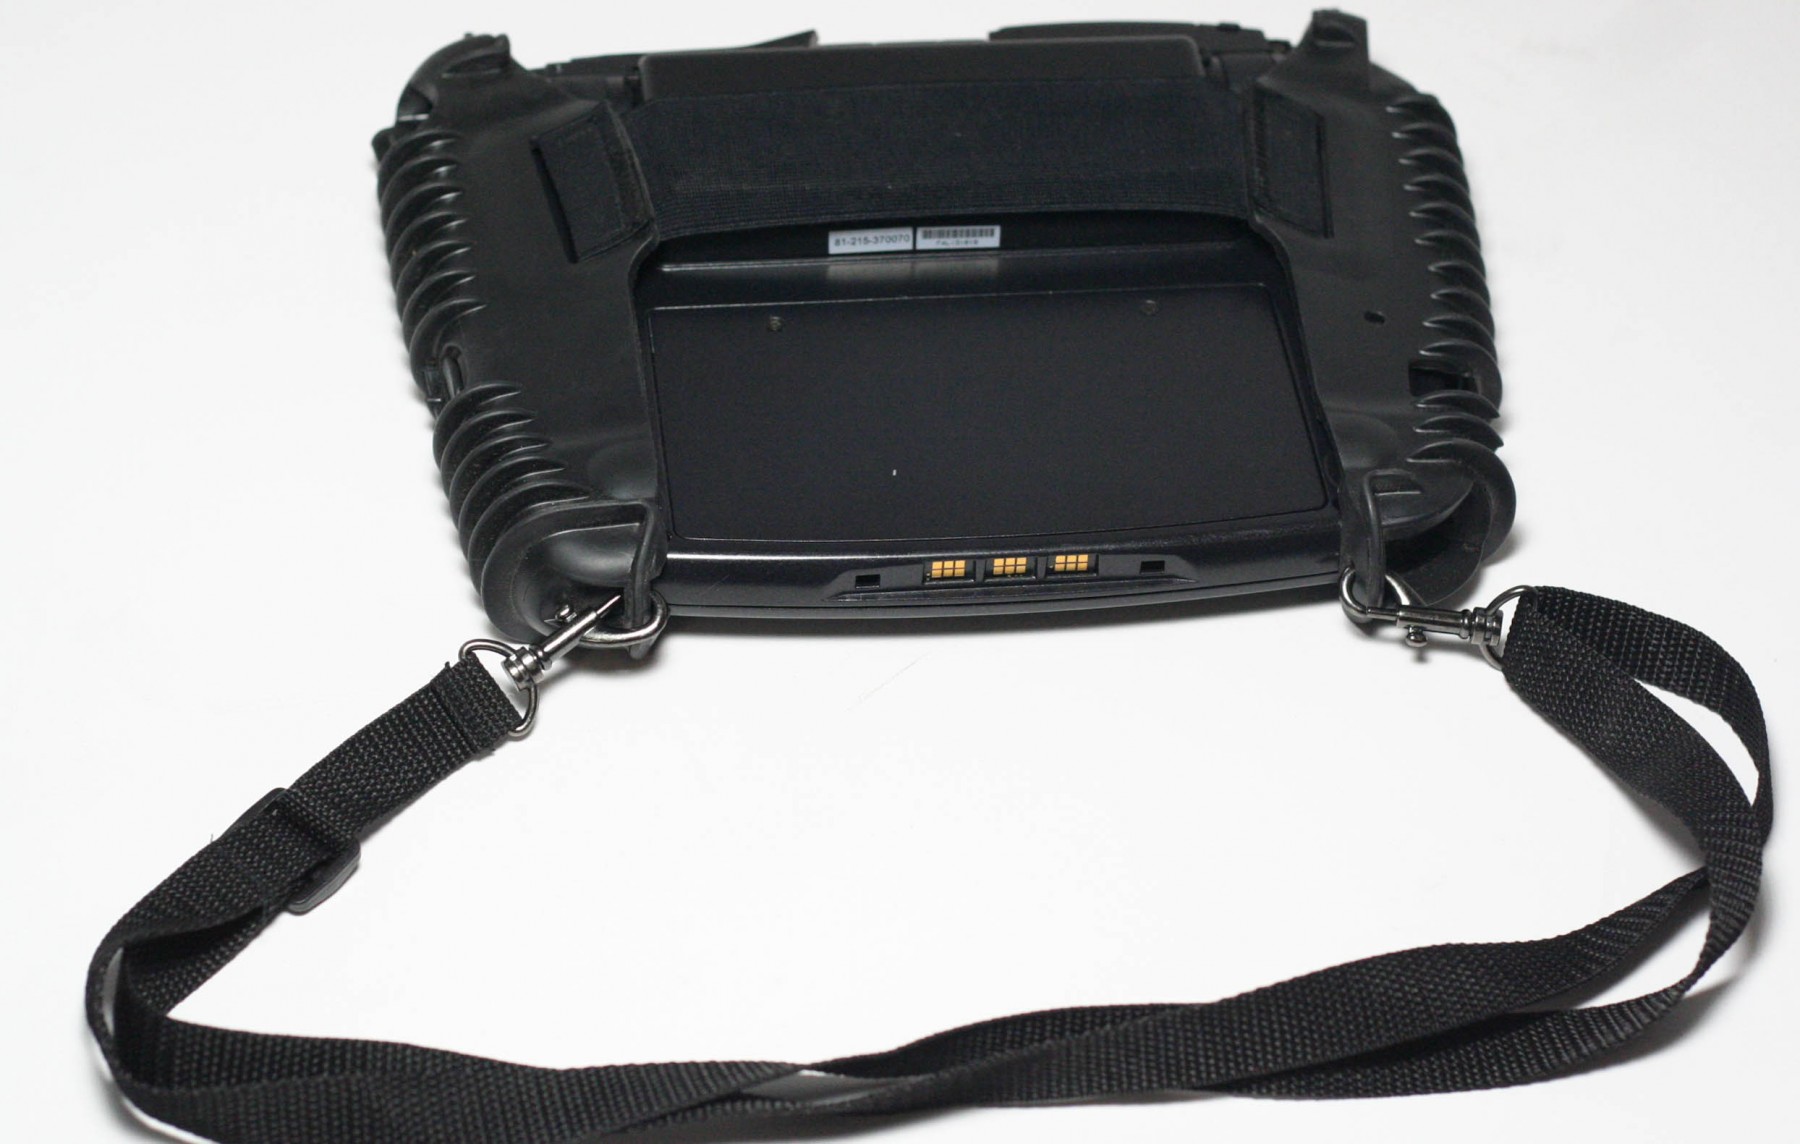 1000490-Radiant Systems DT368 POS Tablet -image